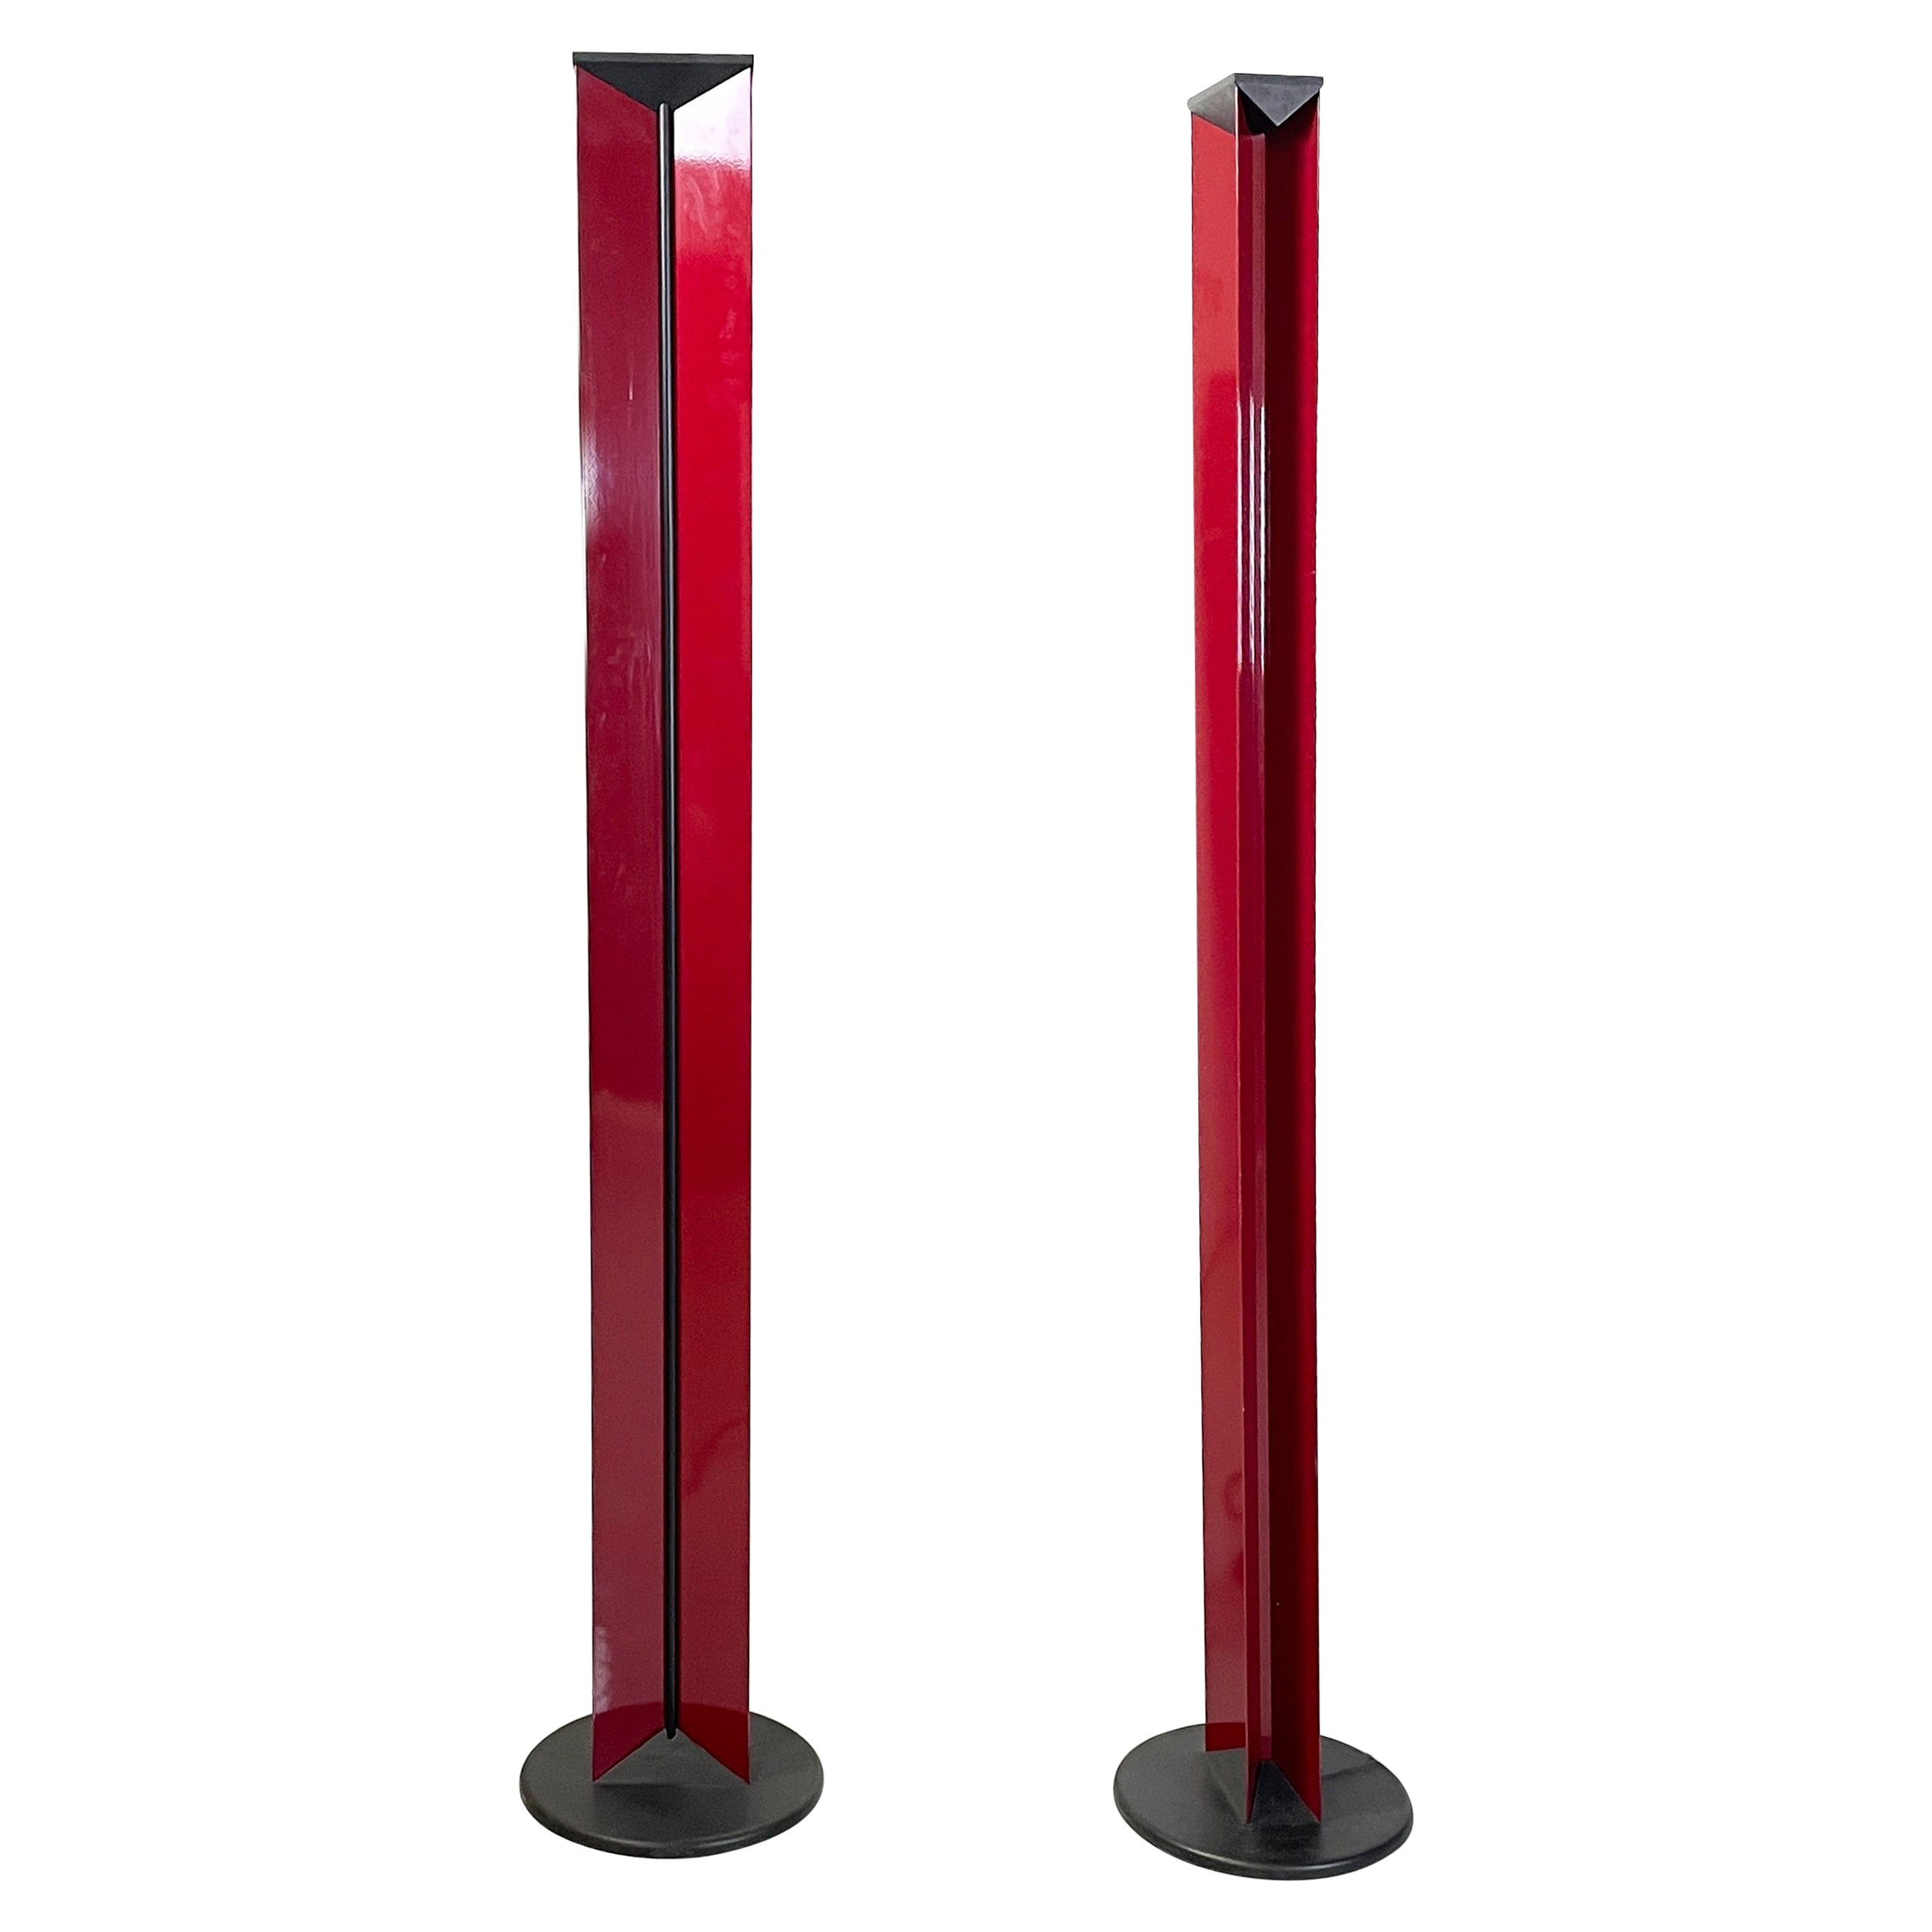 Italian modern Floor lamps in red metal and black plastic by Relco, 1990s For Sale